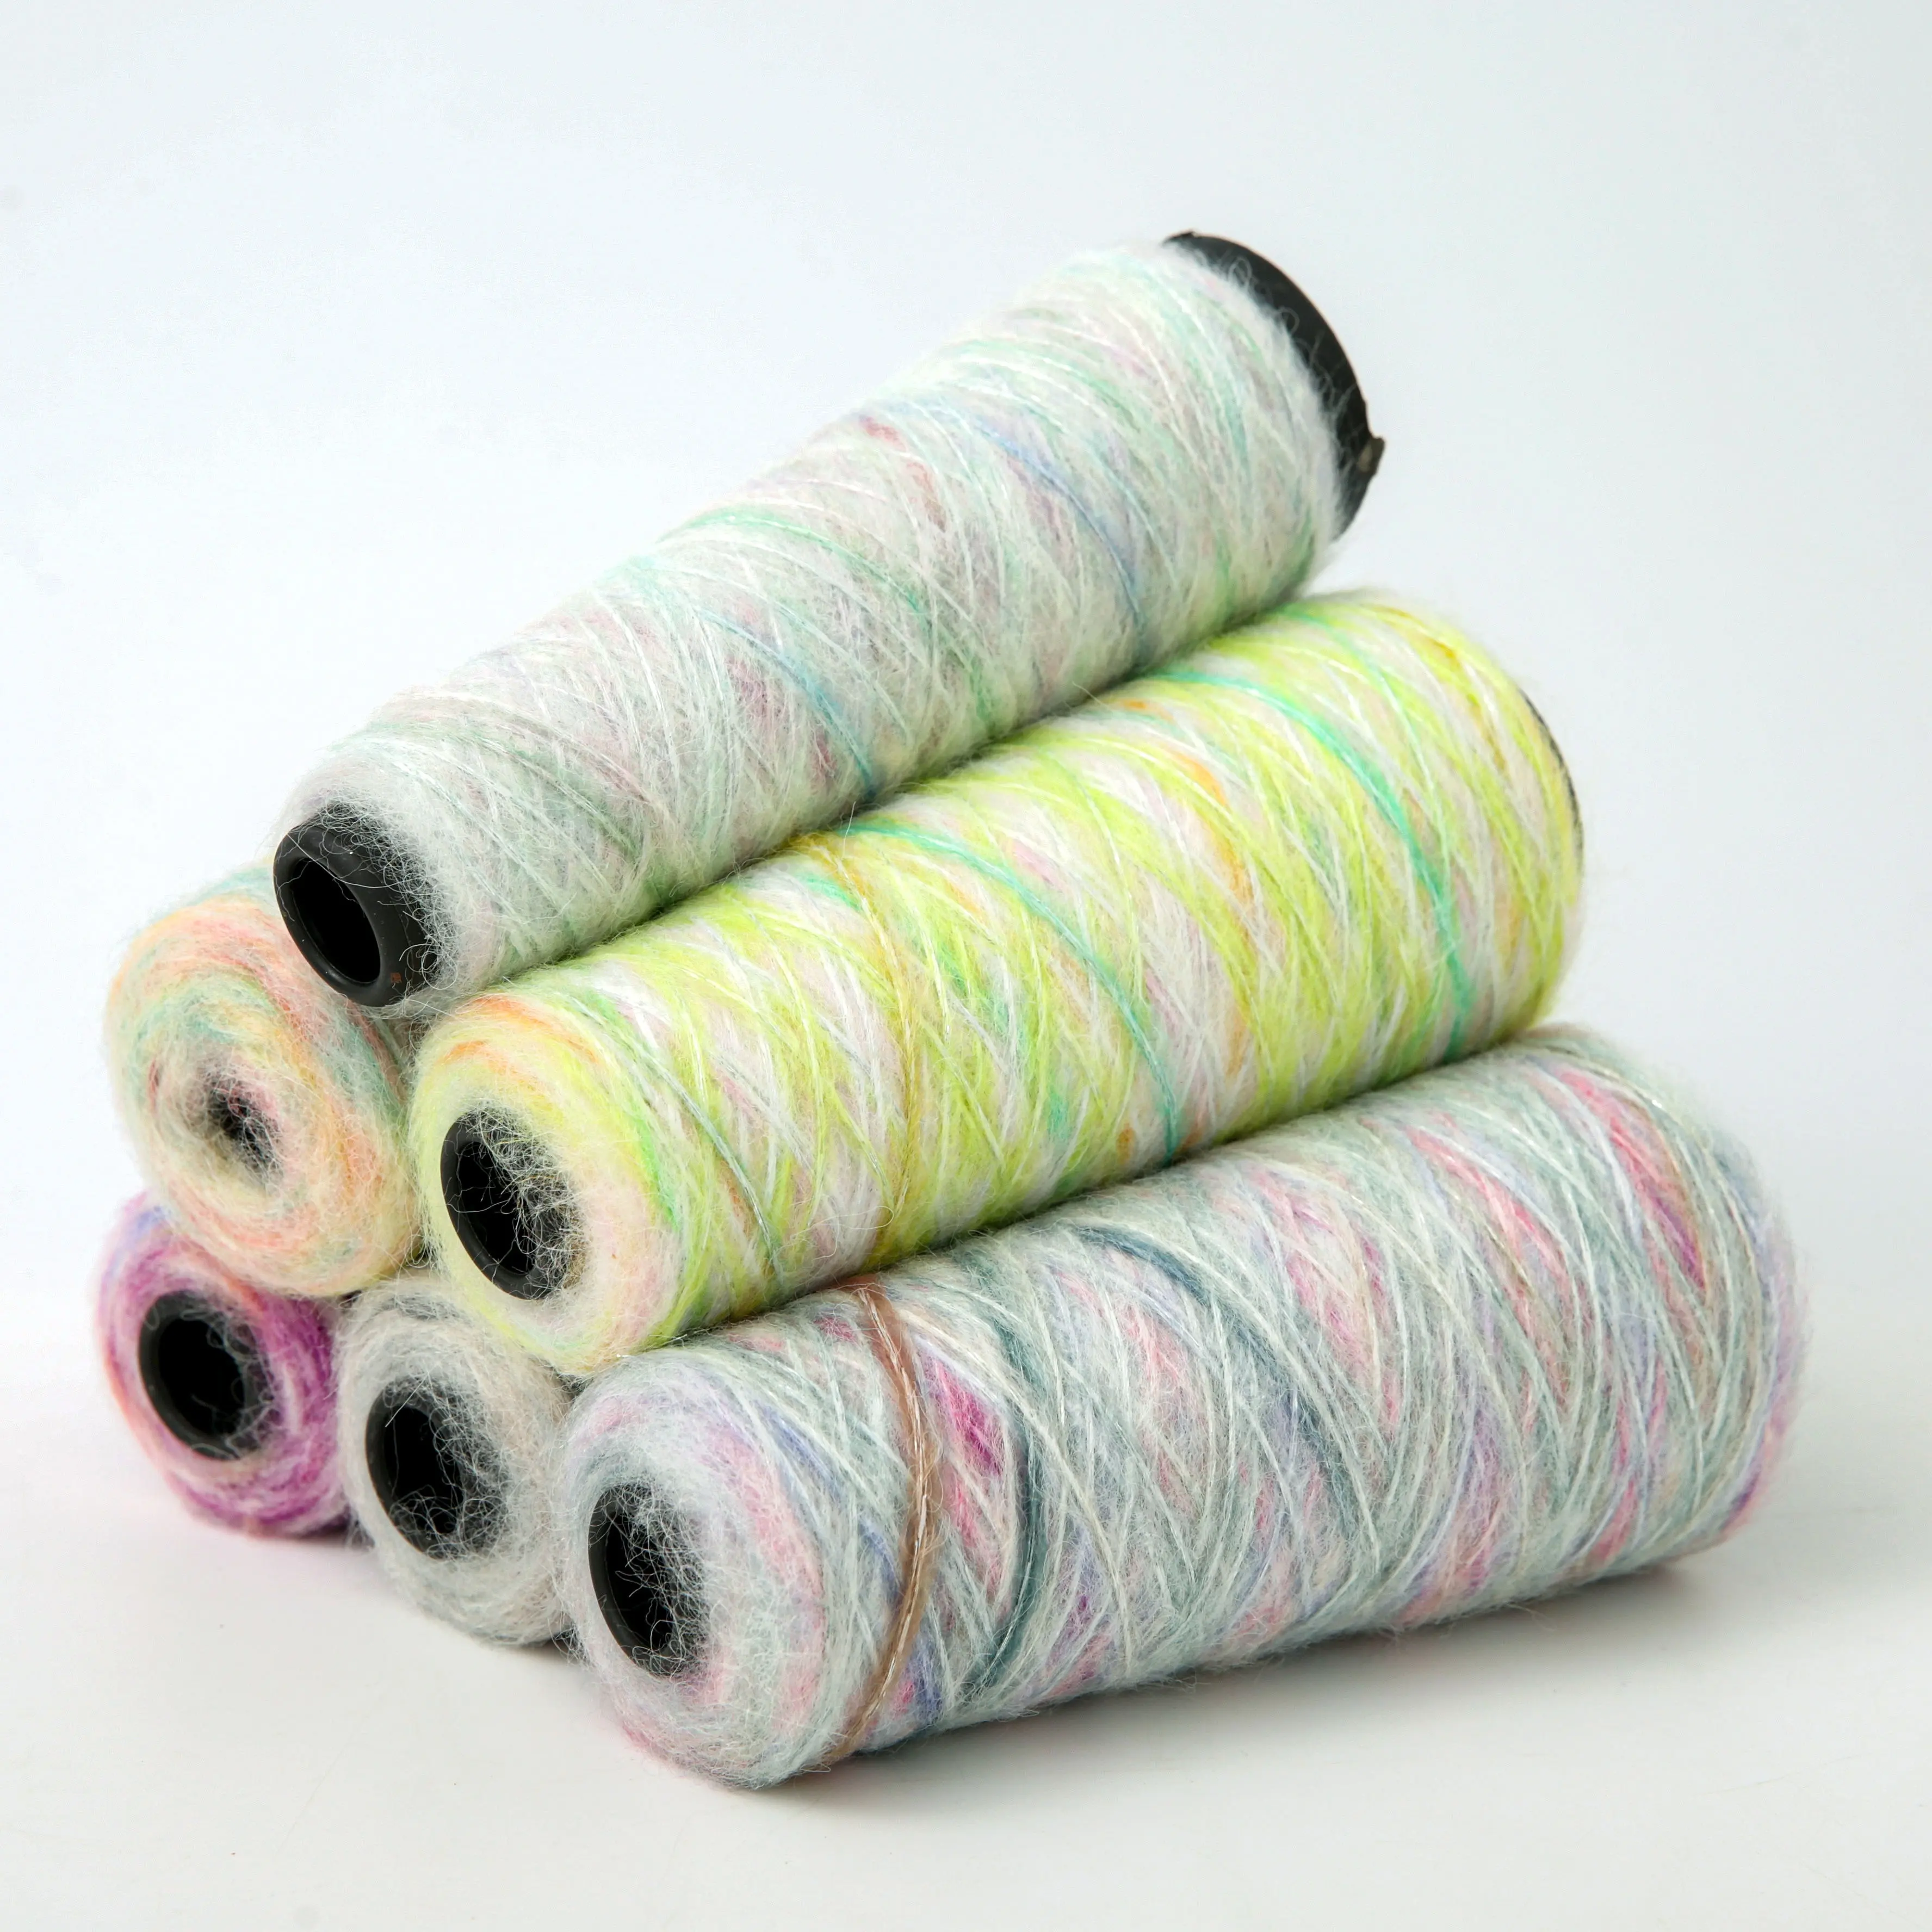 Wholesalers Segemnt Blend Yarn with yarn-dyed effects with Metallic Threads Single Yarn for Fancy